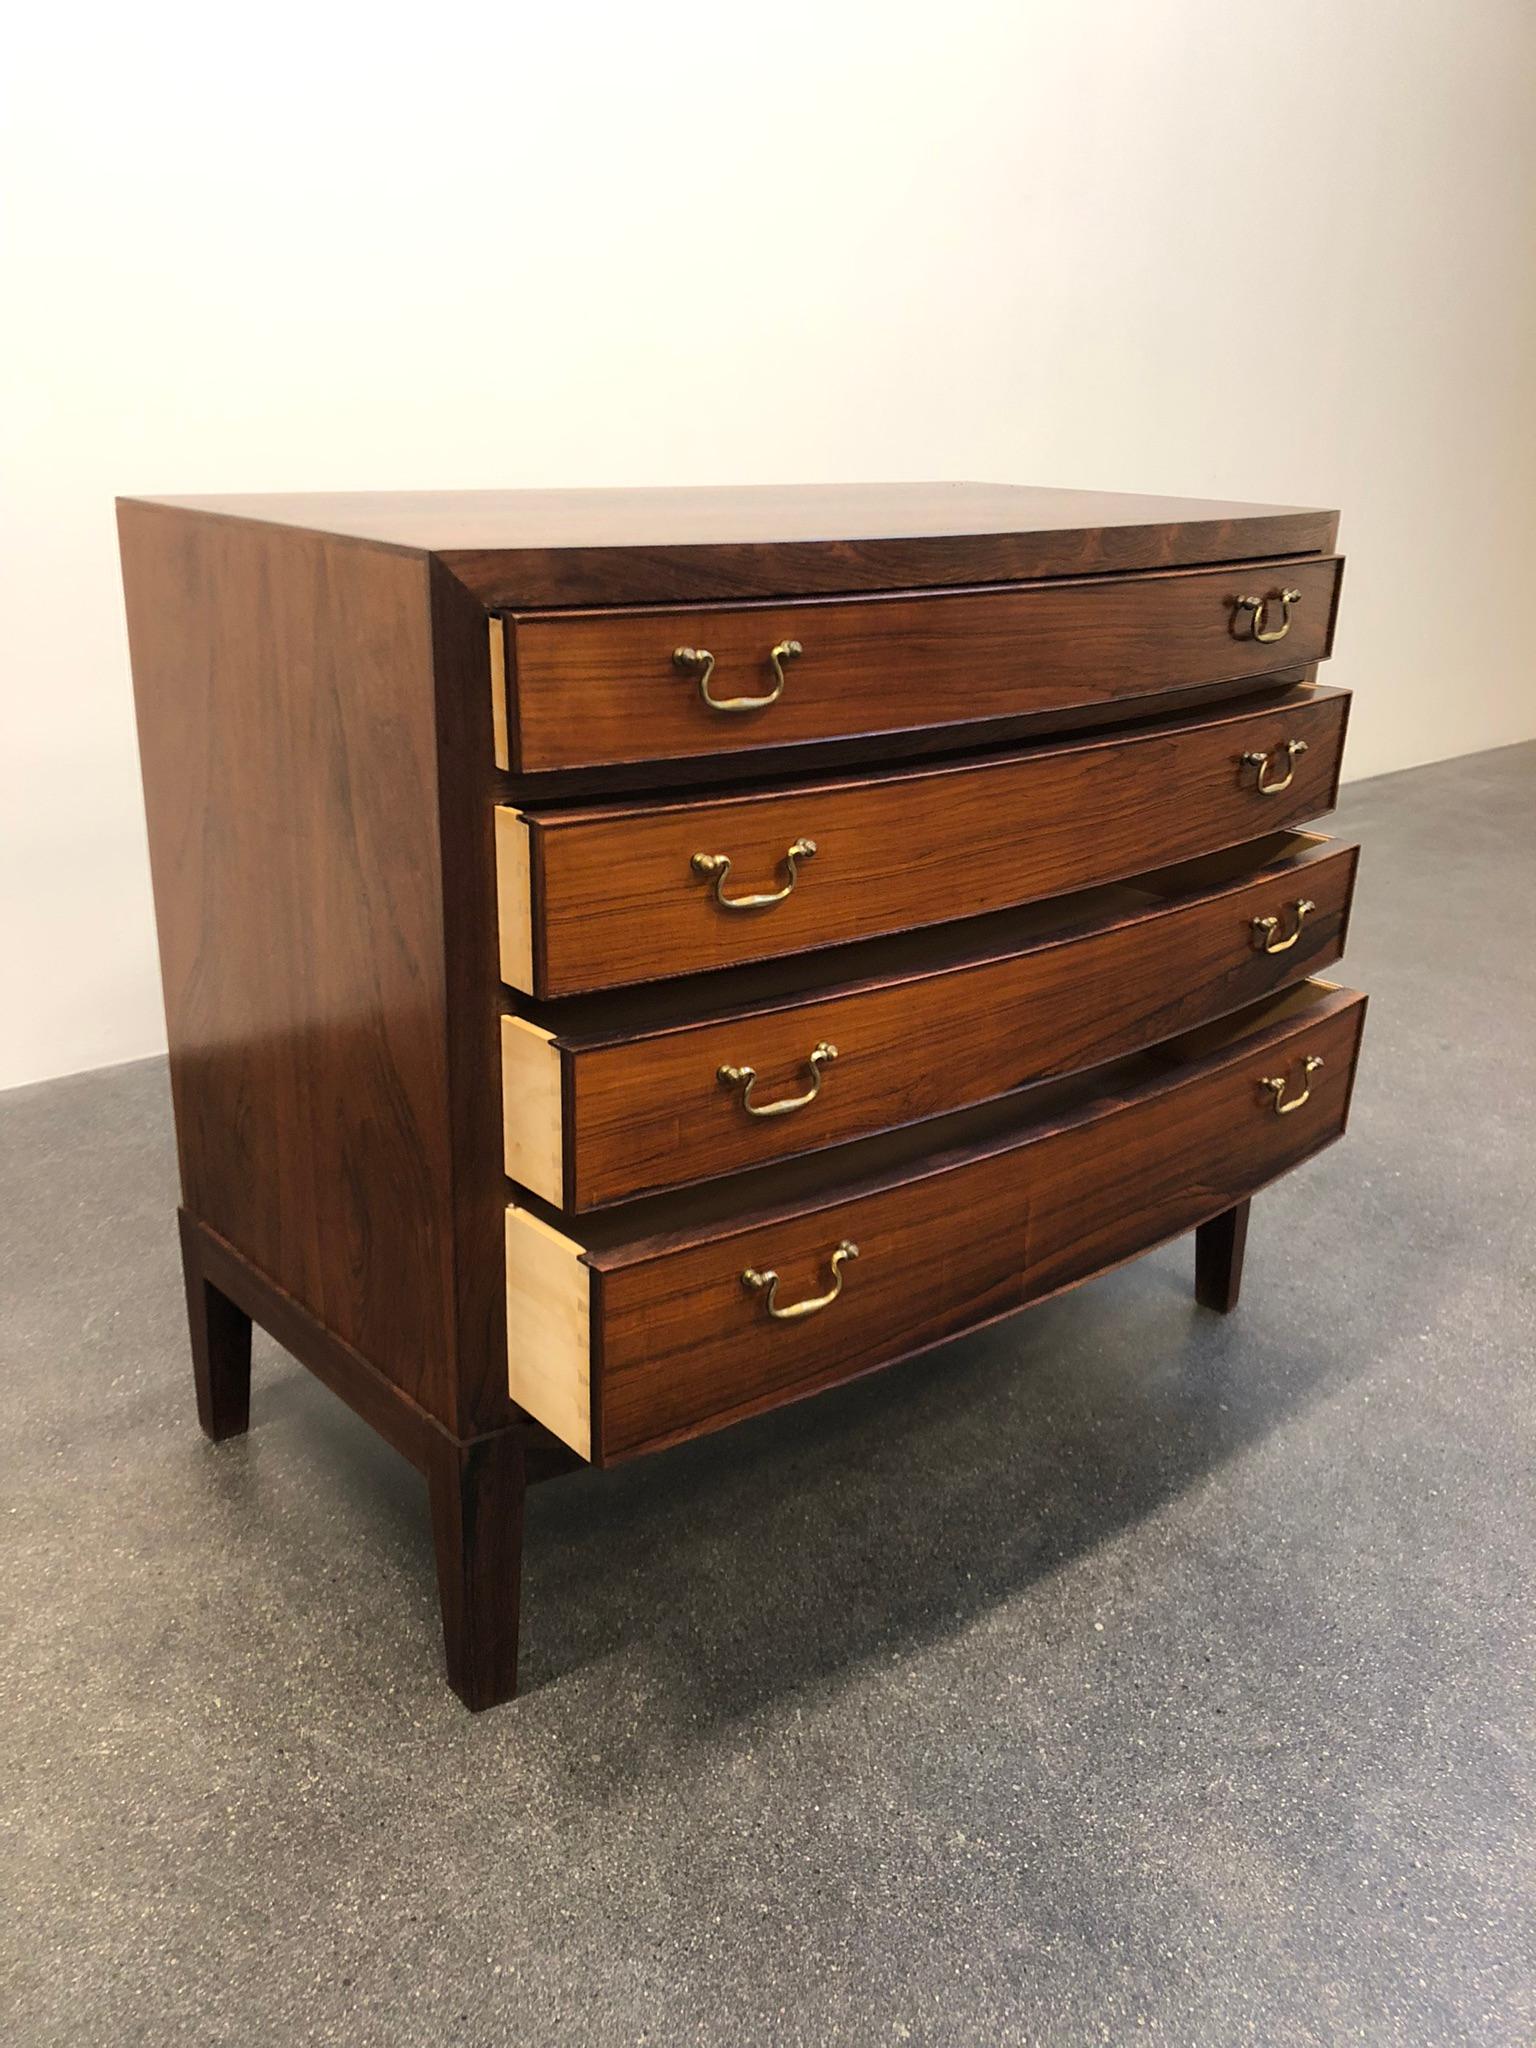 Ole Wanscher Chest of Drawers in Rosewood for Cabinetmaker A. J. Iversen For Sale 5